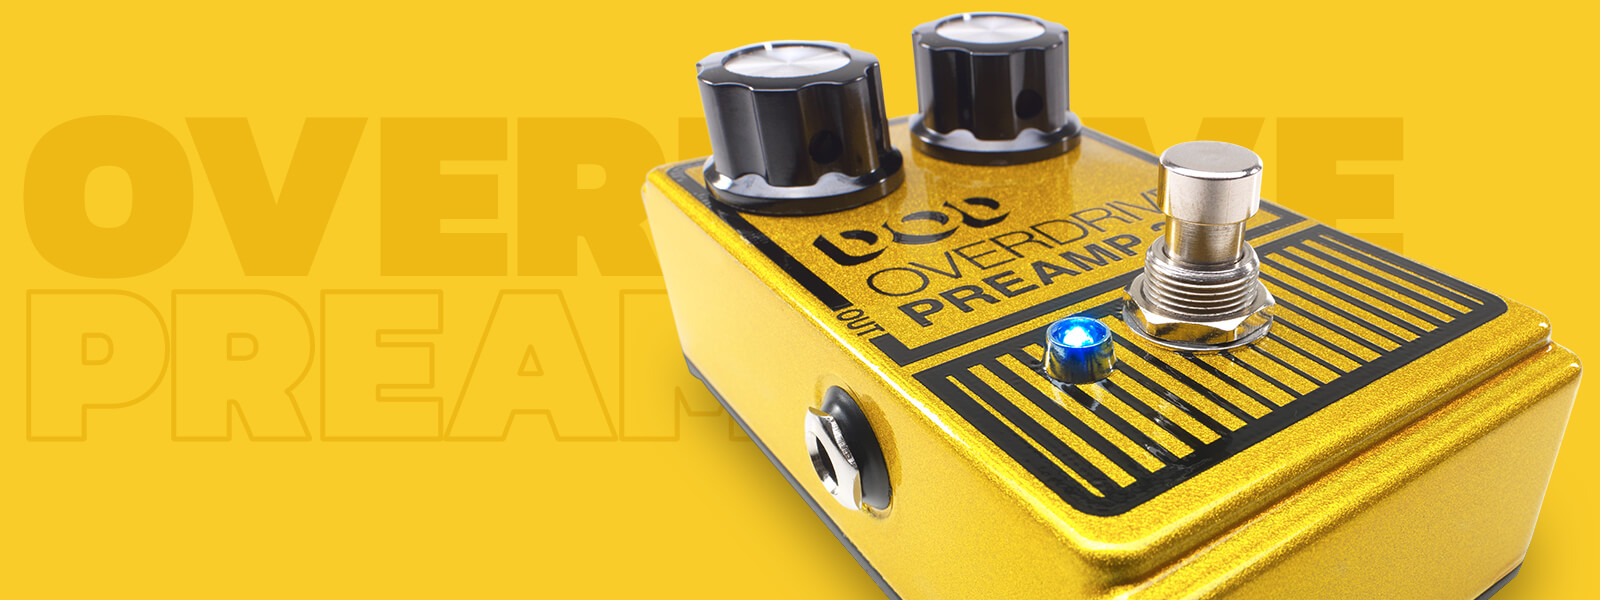 DOD Overdrive Preamp 250 guitar pedal on matching golden yellow background